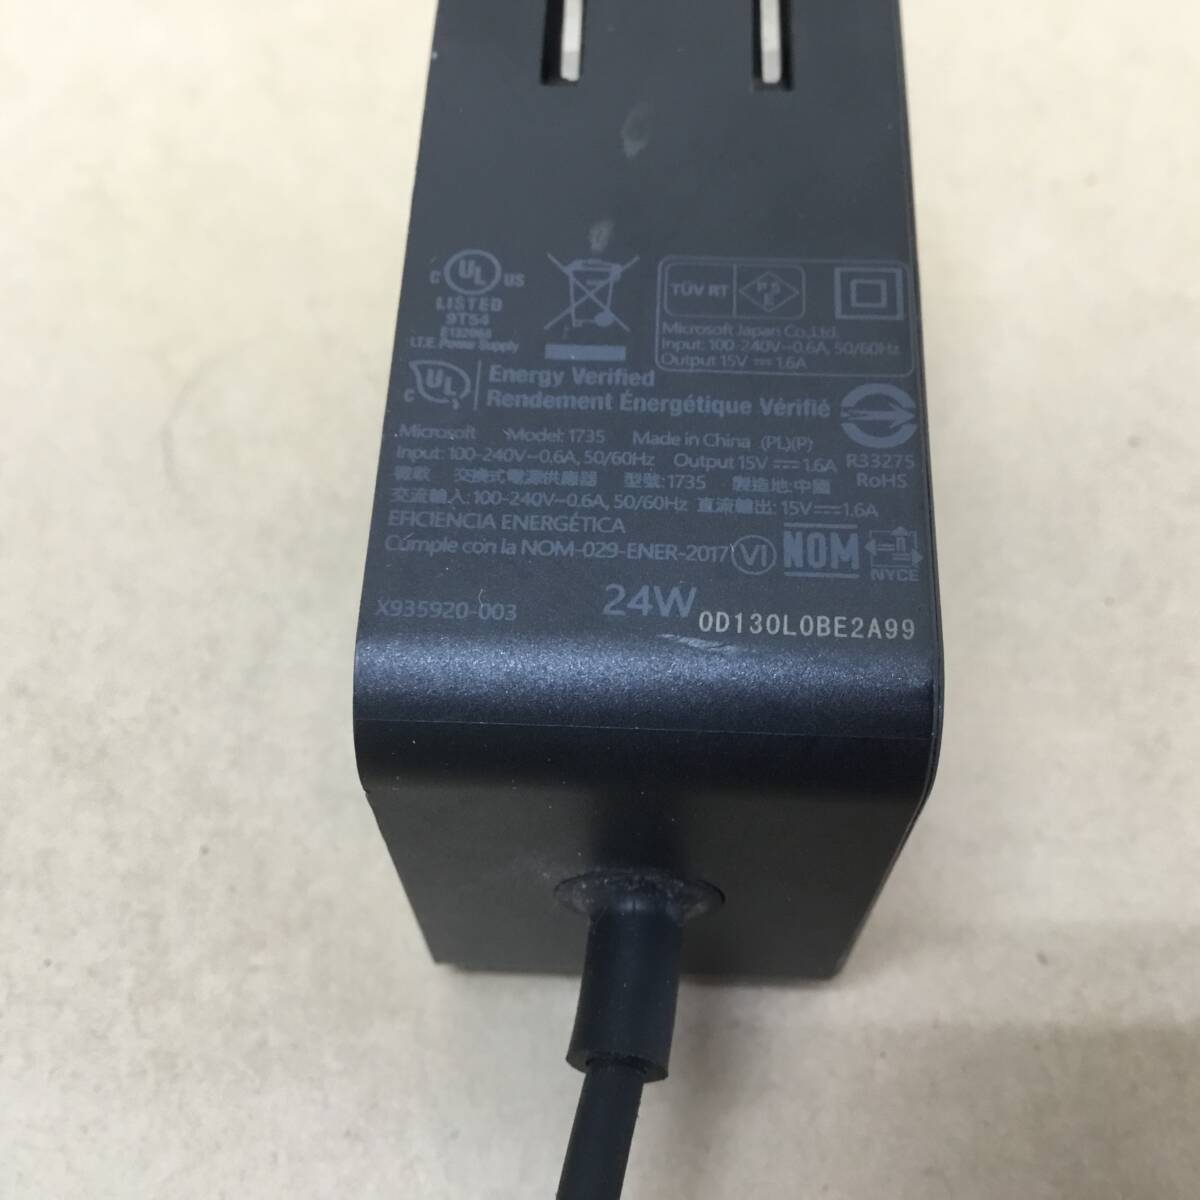 [2211087816-1] Microsoft Surface Pro4 Surface Pro2017(M3) Surface Go for 24W original AC adaptor 1735 15V 1.6A charger 1735 1736 1724.